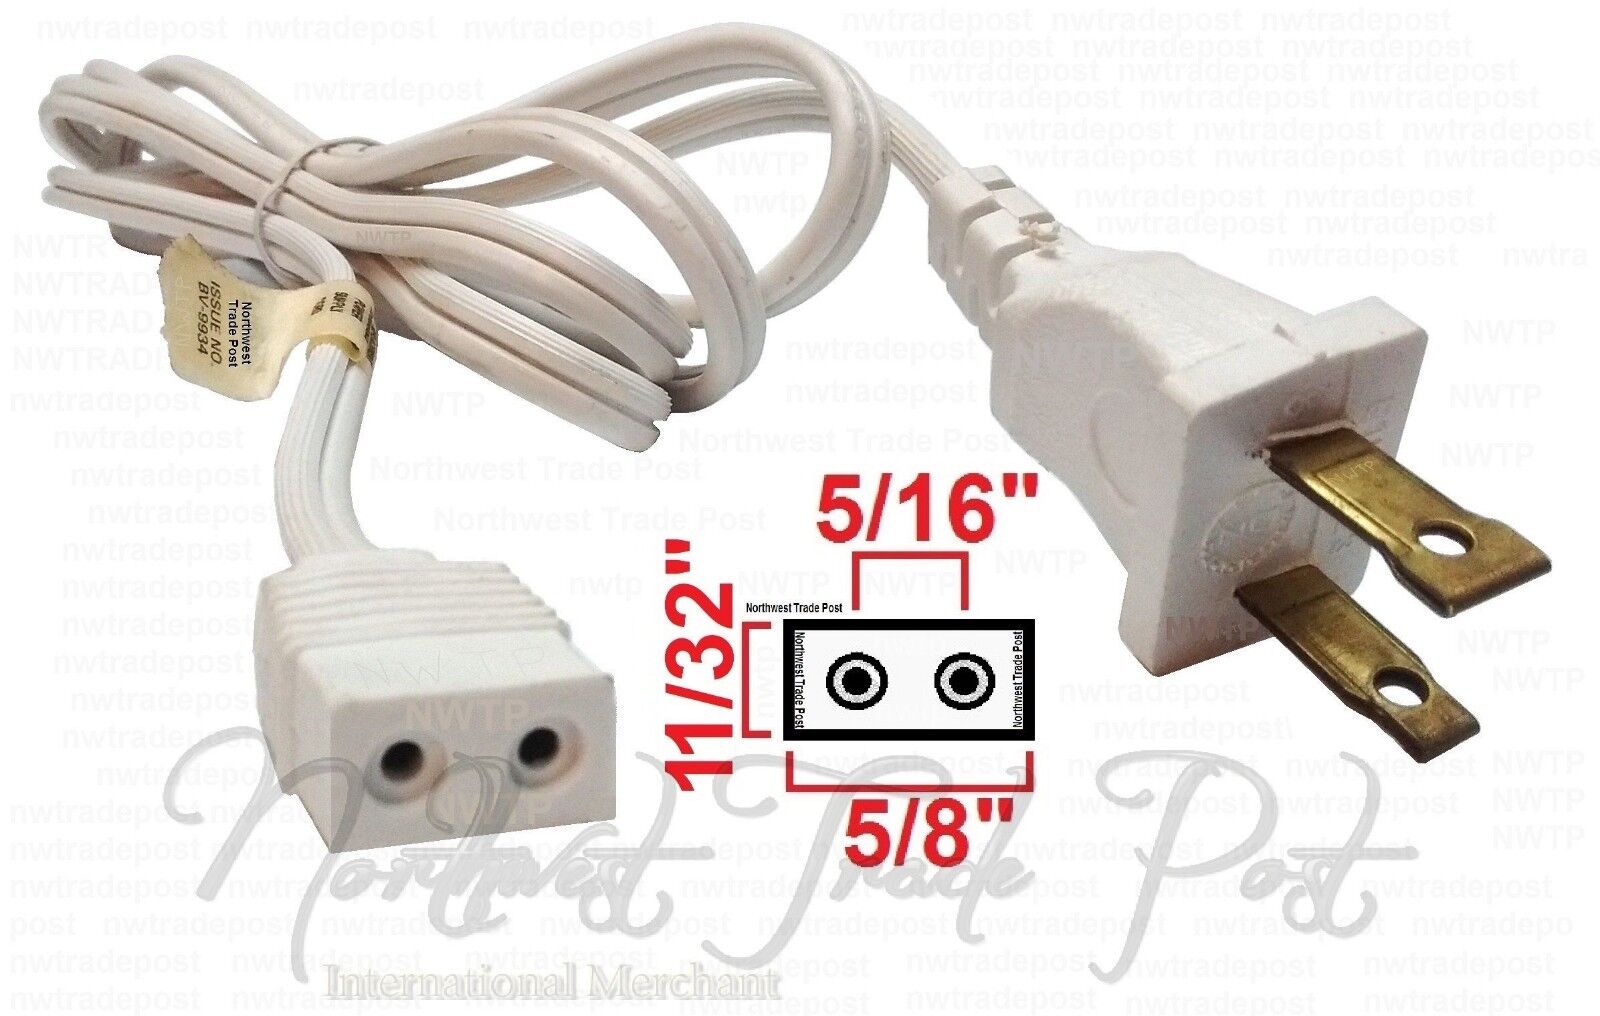 Replacement 6ft Power Cord for Vintage Solid State TV Stereo Radio 2-Prong Pin